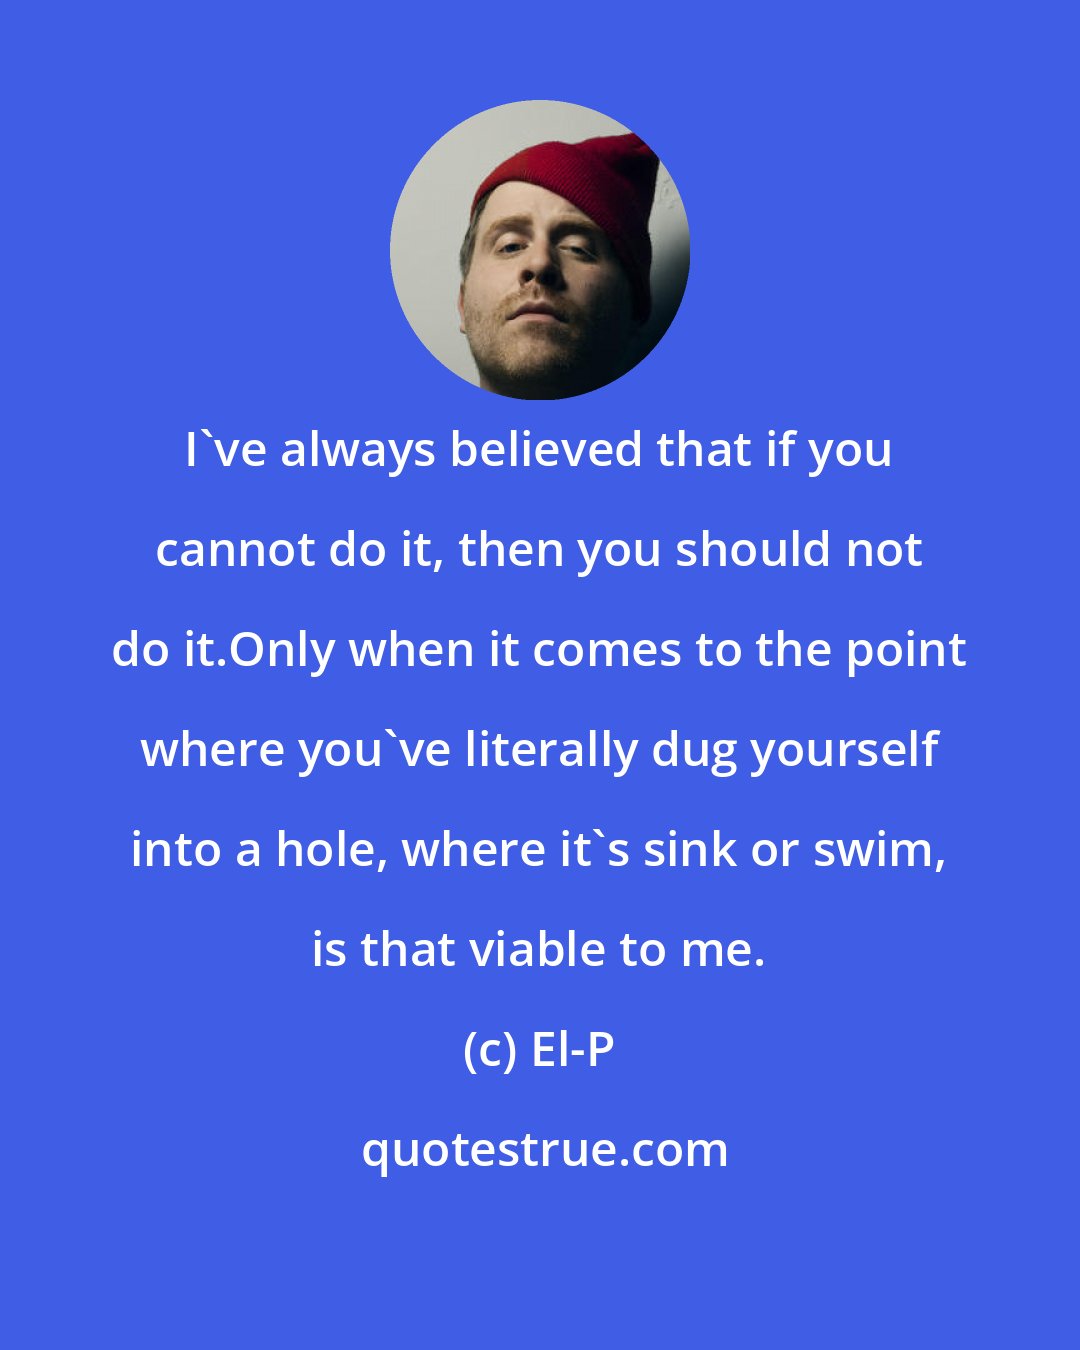 El-P: I've always believed that if you cannot do it, then you should not do it.Only when it comes to the point where you've literally dug yourself into a hole, where it's sink or swim, is that viable to me.